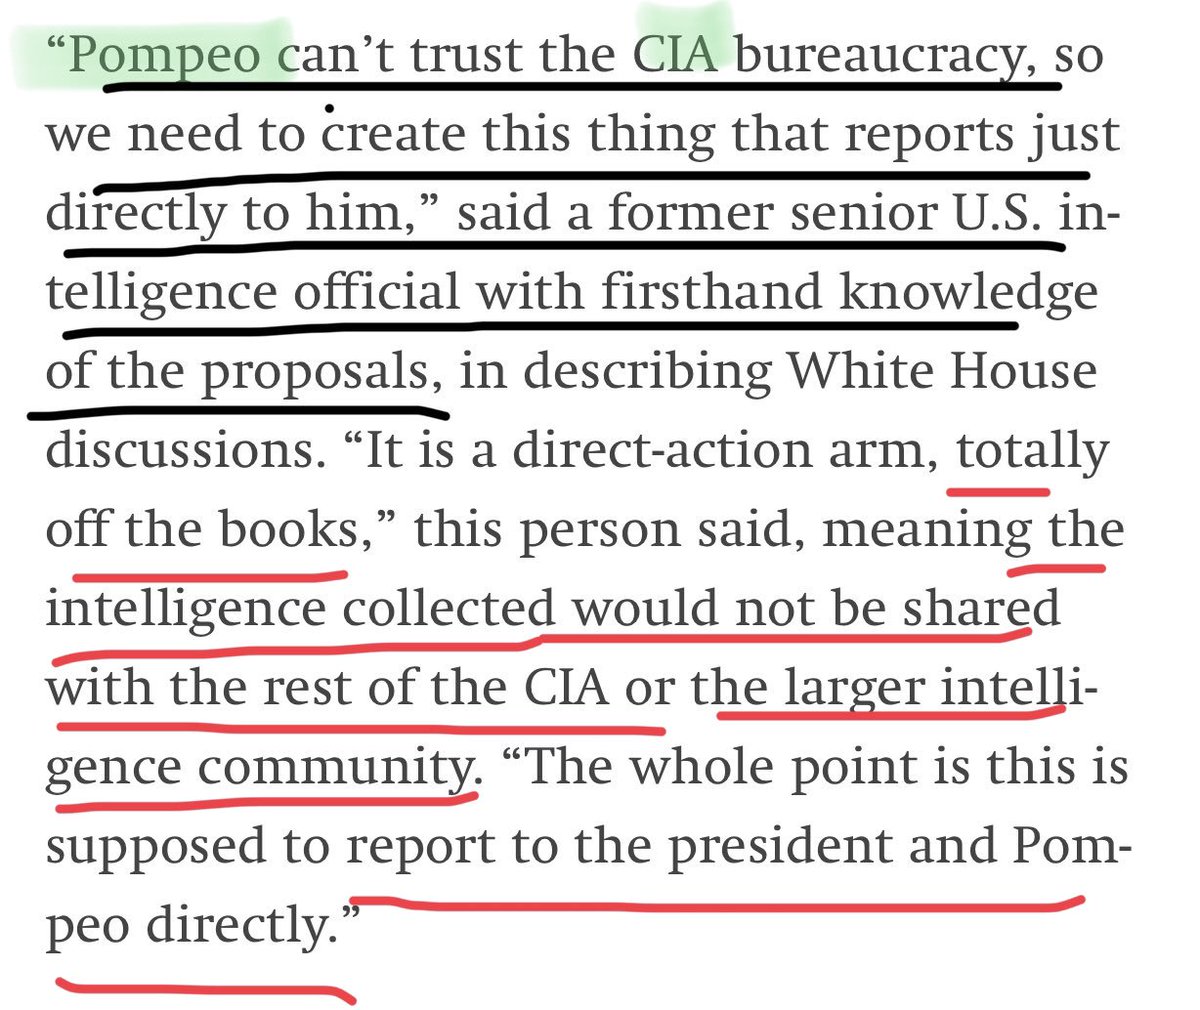 ”The intelligence apparatus would be used to justify the Trump administration’s political agenda” - because Pompeo does NOT trust the CIAcc  @JohnBrennan